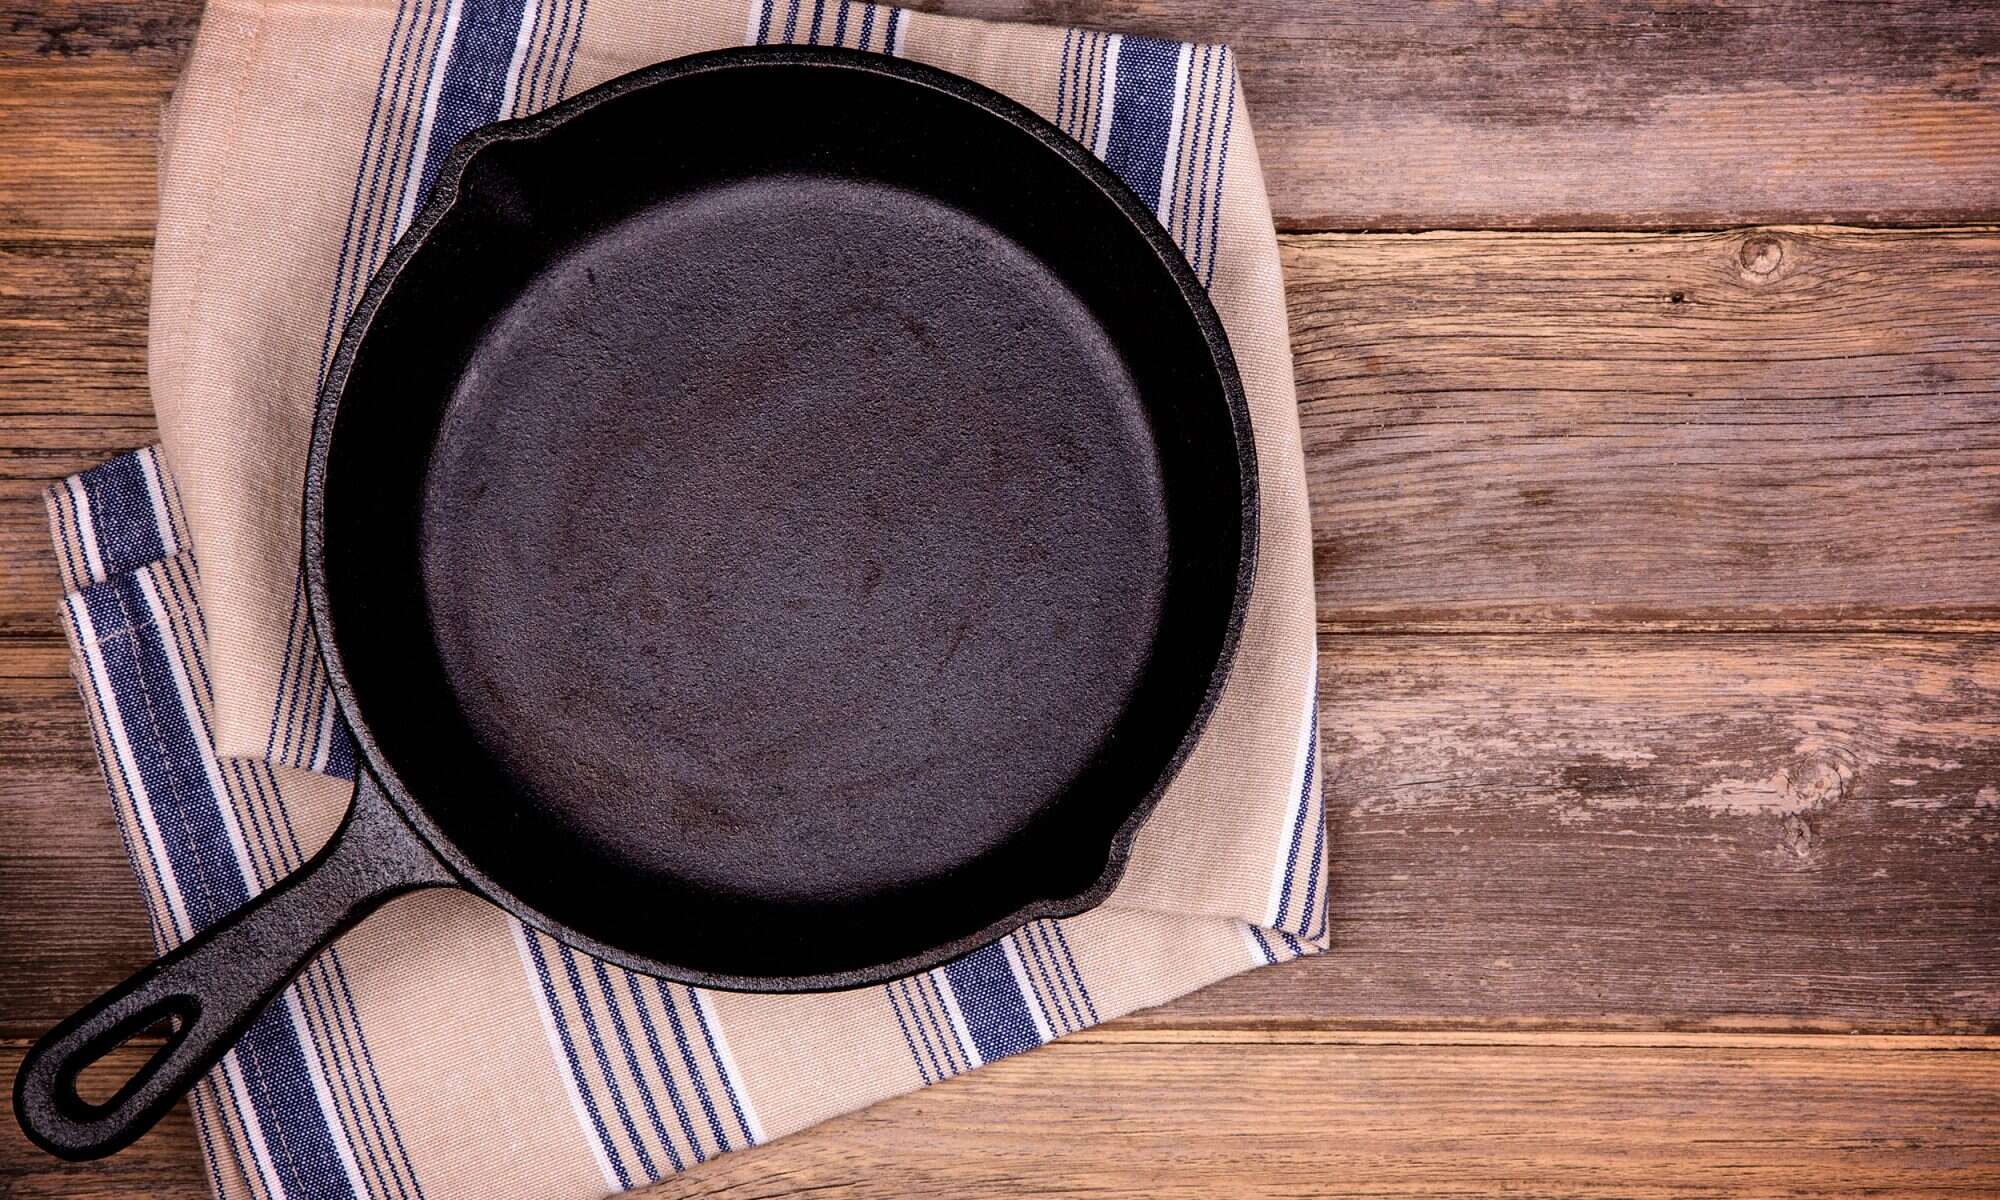 Skip The Bag: Cleaning and Care of Cast Iron